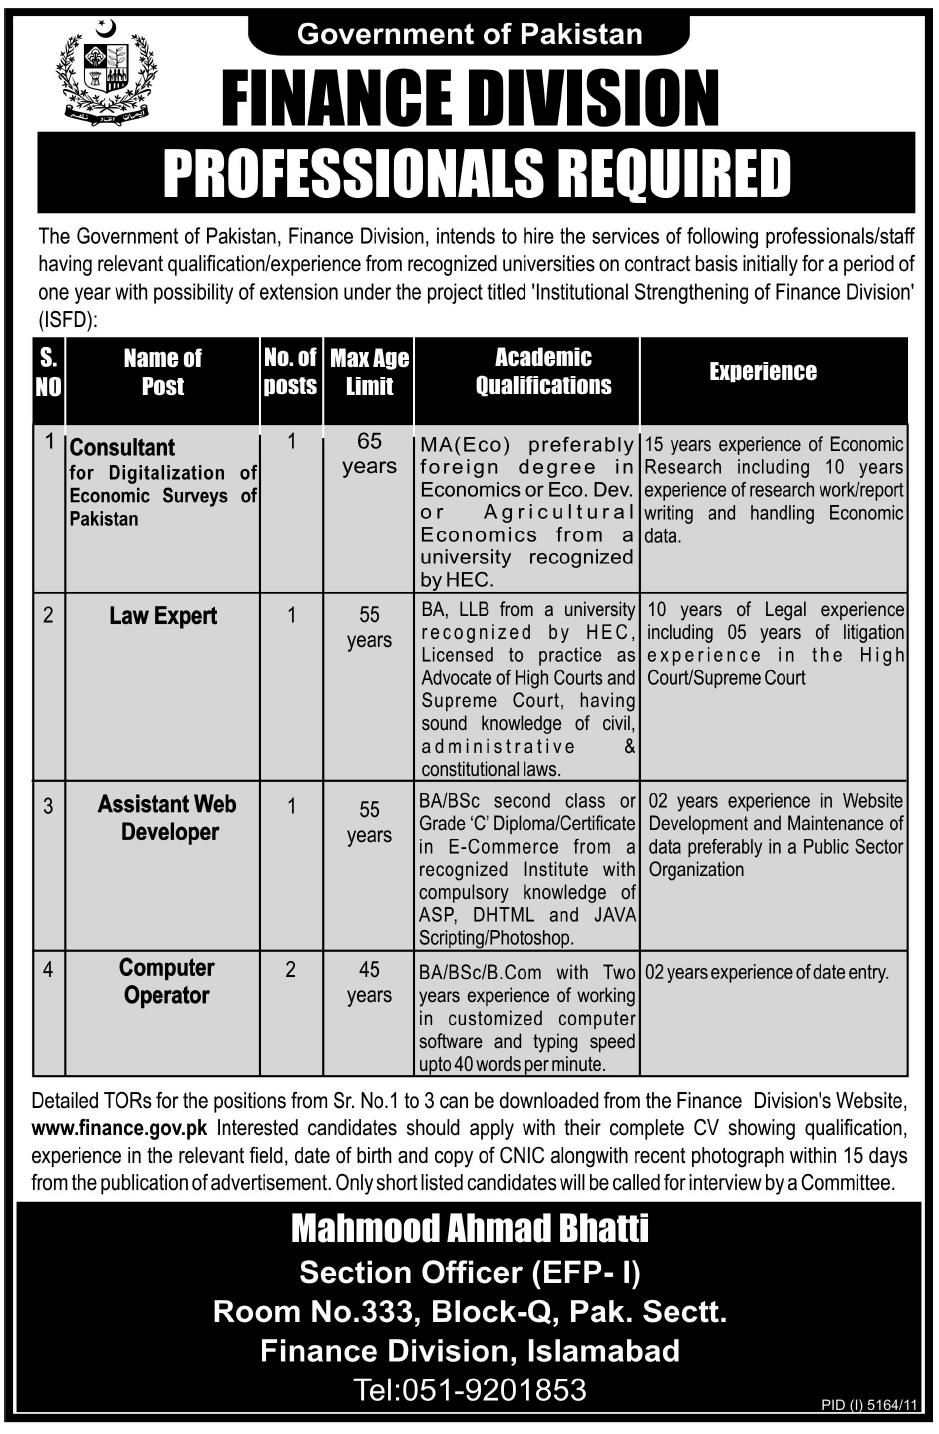 Jobs at Finance Division, Government of Pakistan